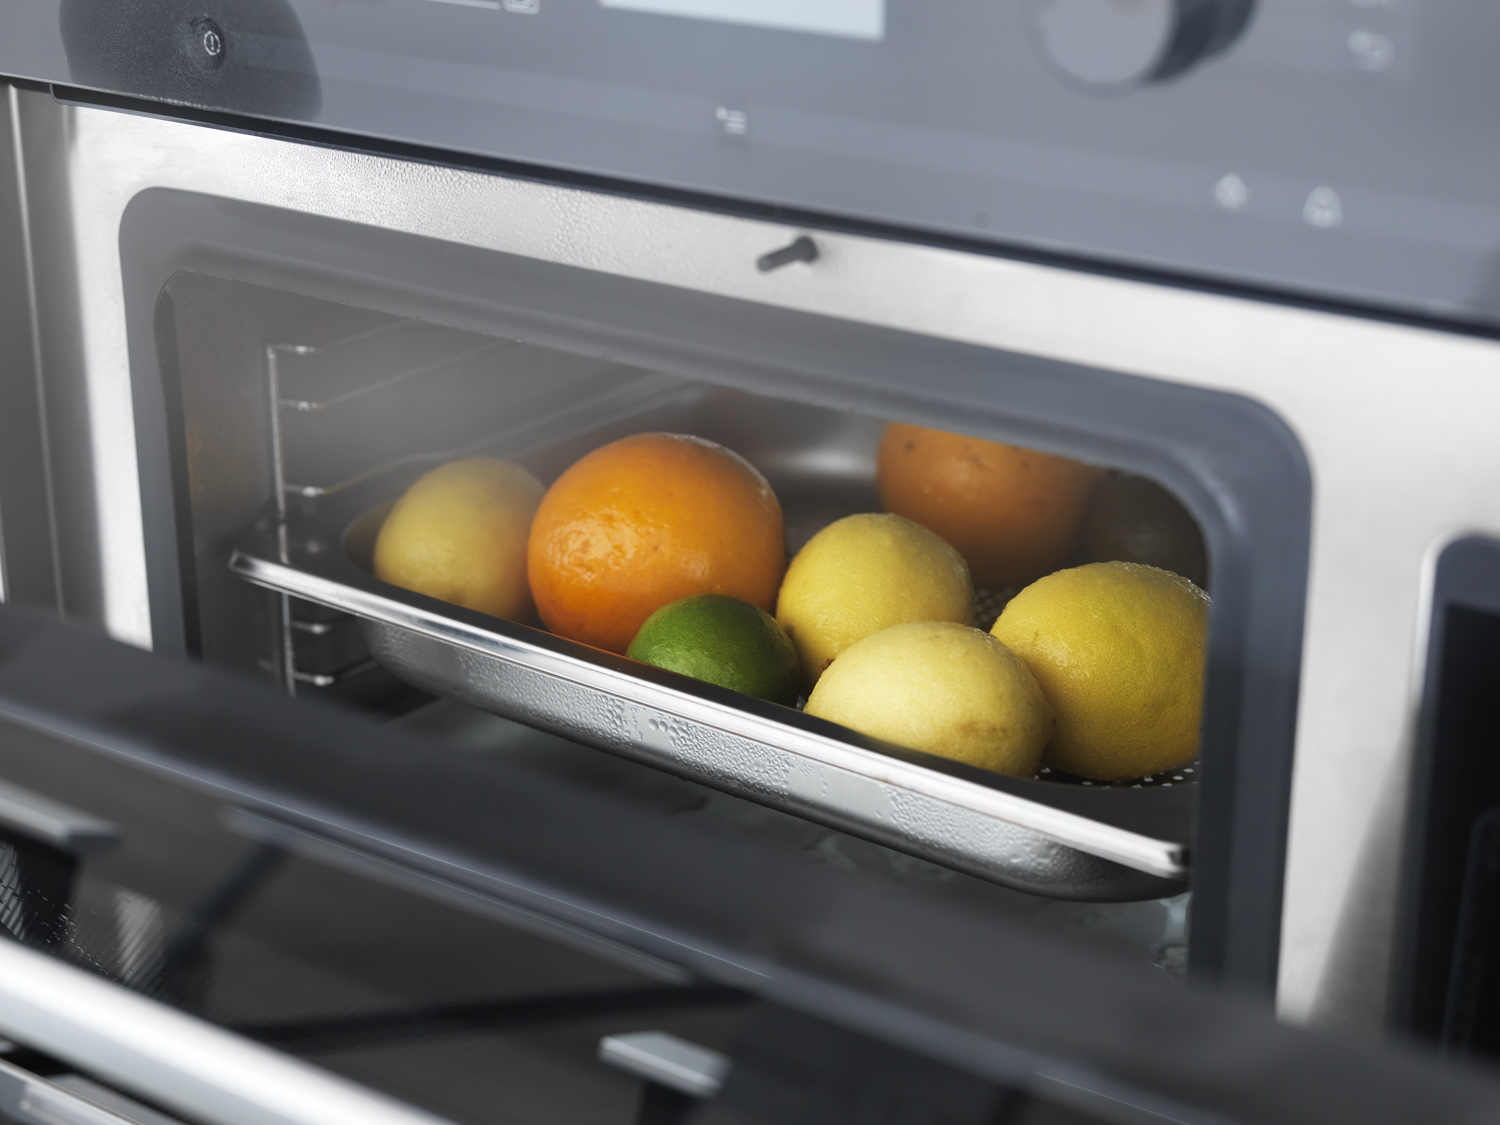 Miele Fruit Steaming